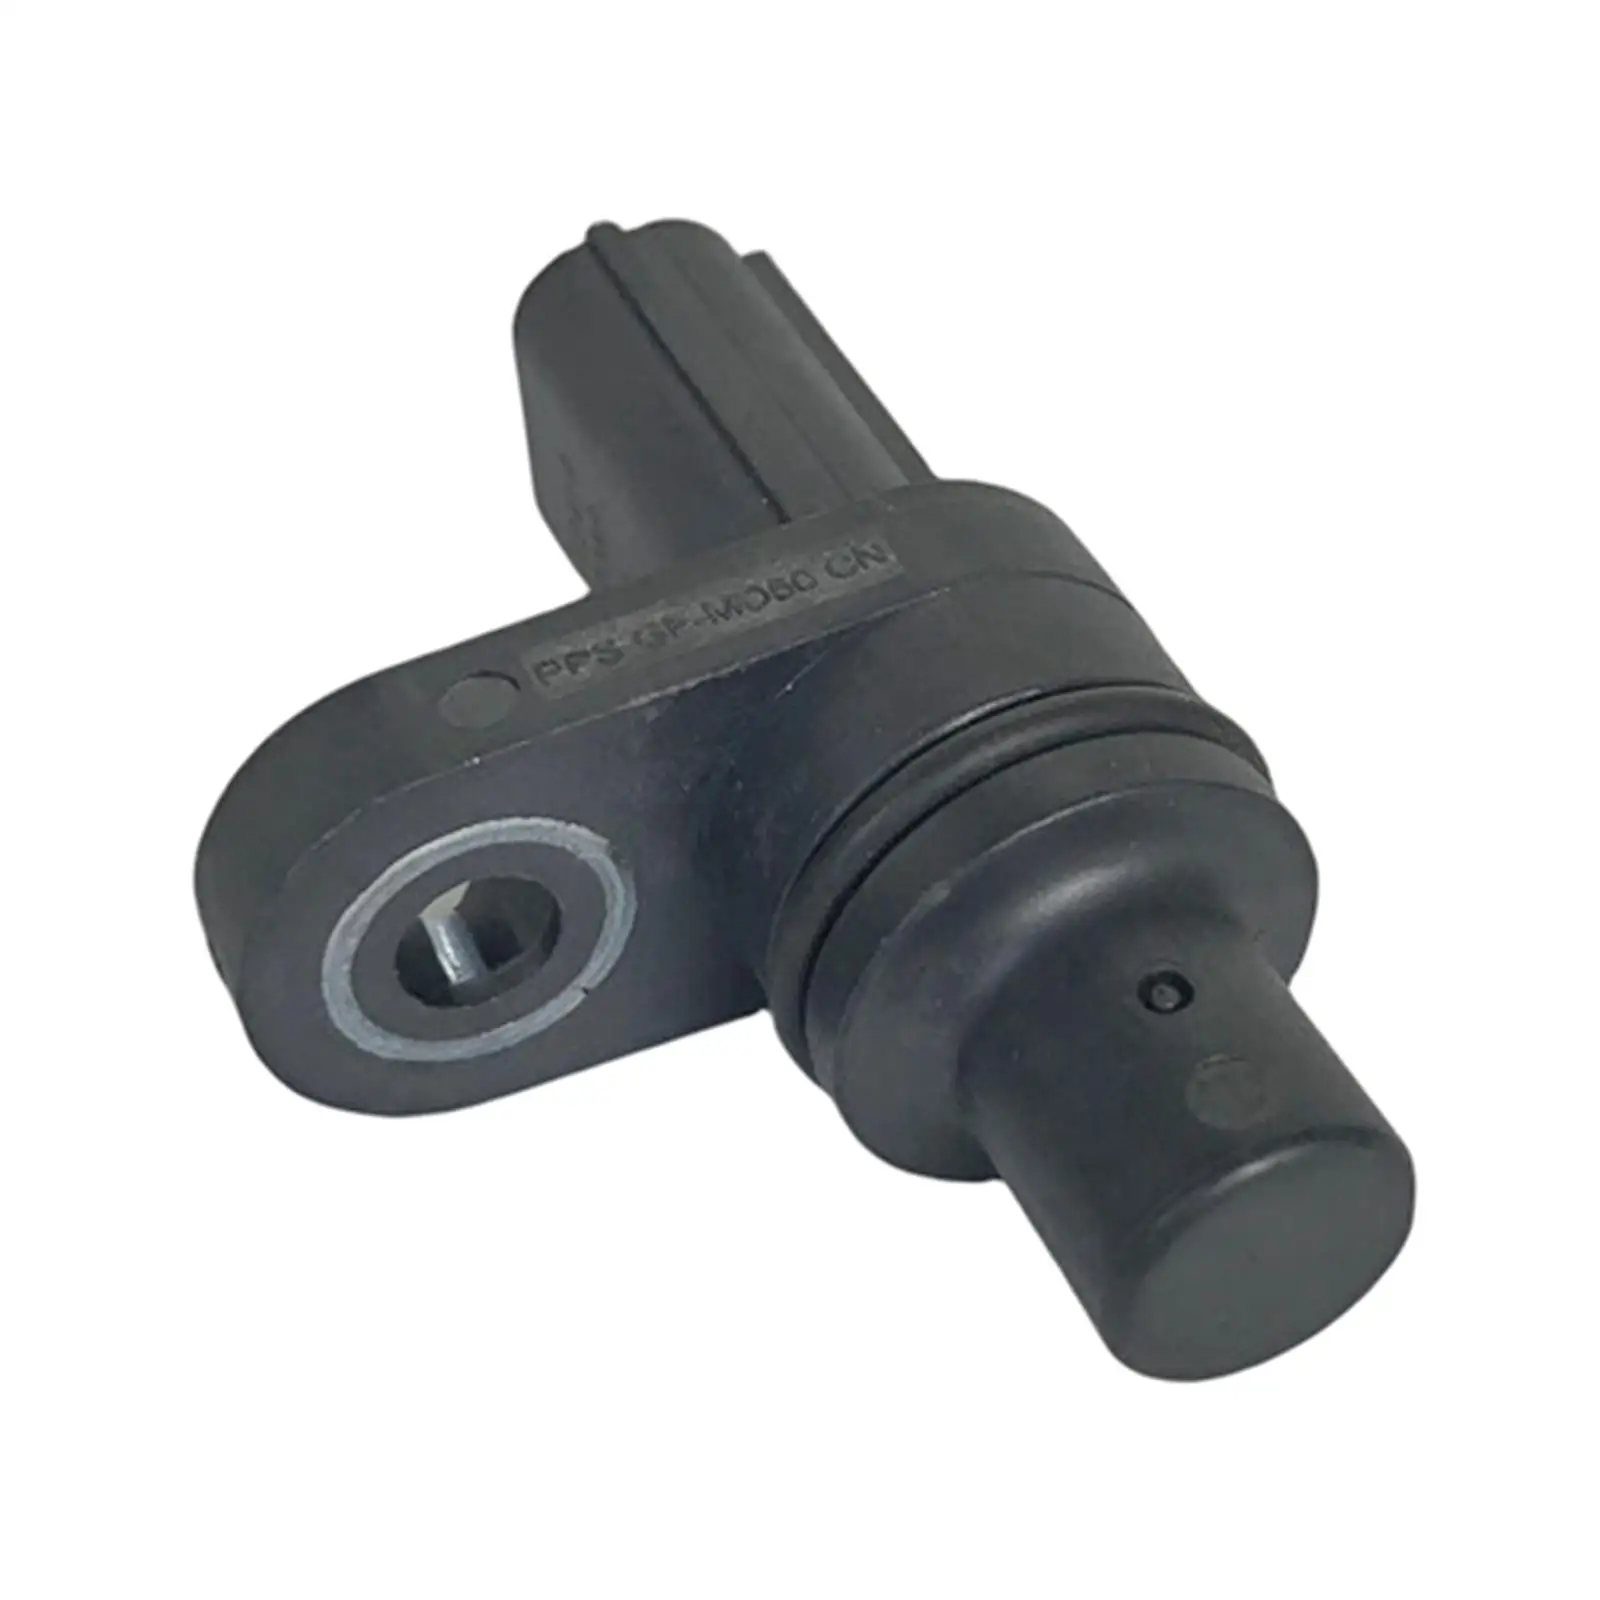 Transmission Speed Sensor 28810-5DJ-004 High Quality Replace Easy to Install for Honda Civic 16-19 Automotive Accessories